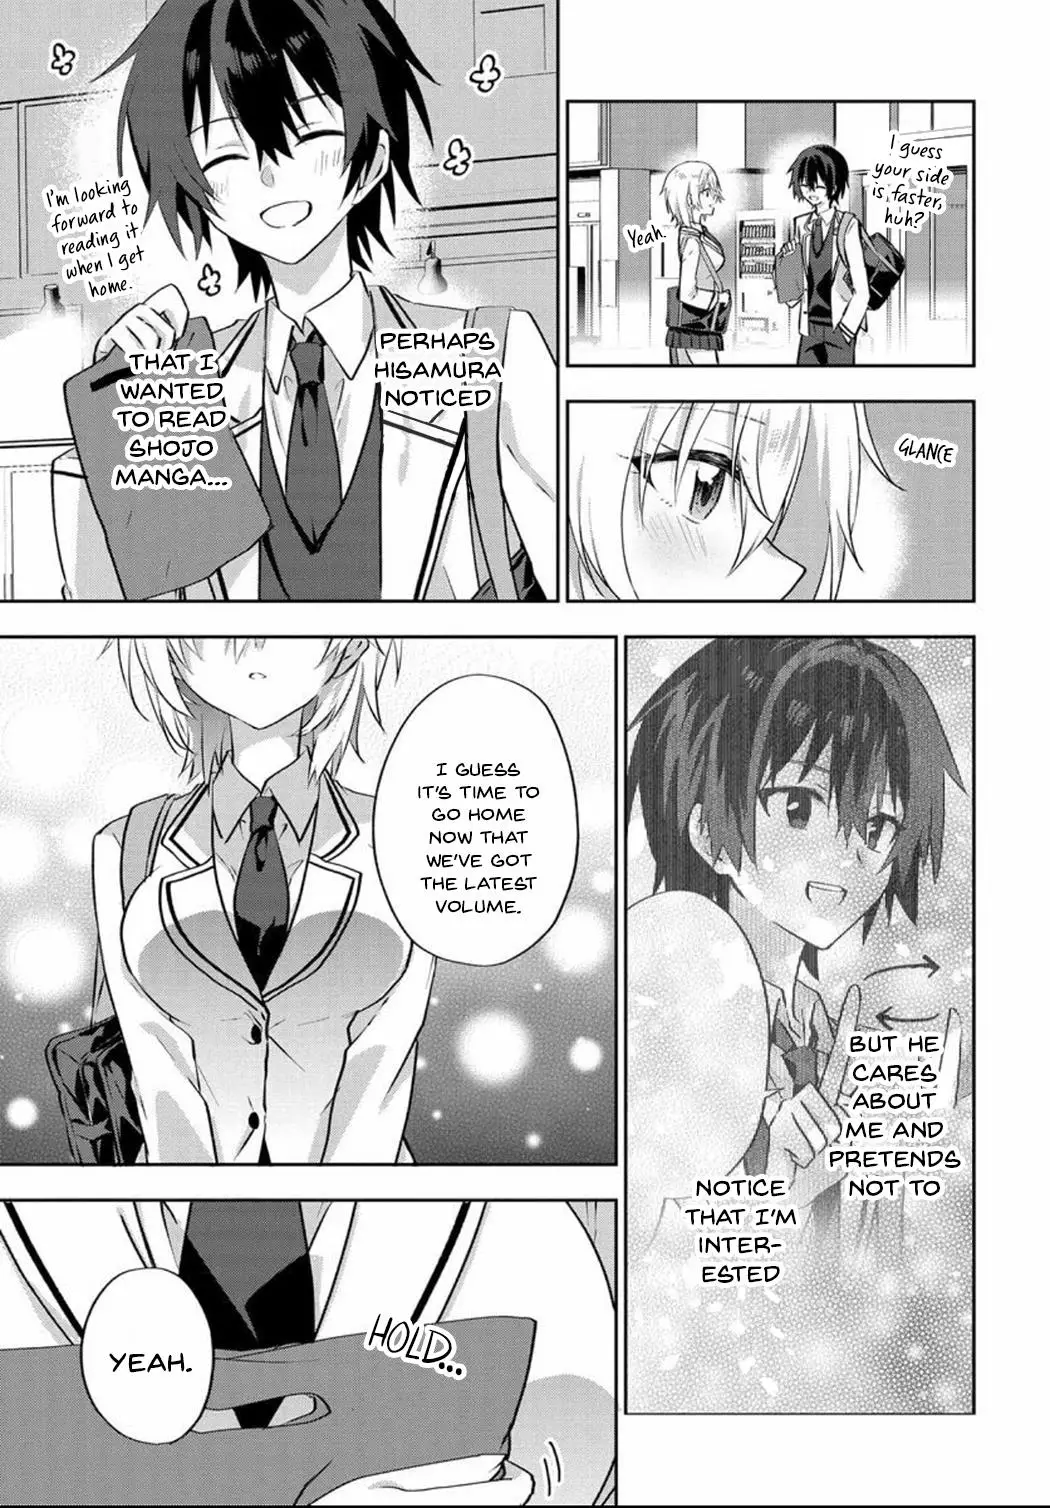 Since I’Ve Entered The World Of Romantic Comedy Manga, I’Ll Do My Best To Make The Losing Heroine Happy - 5.2 page 2-30d42c60